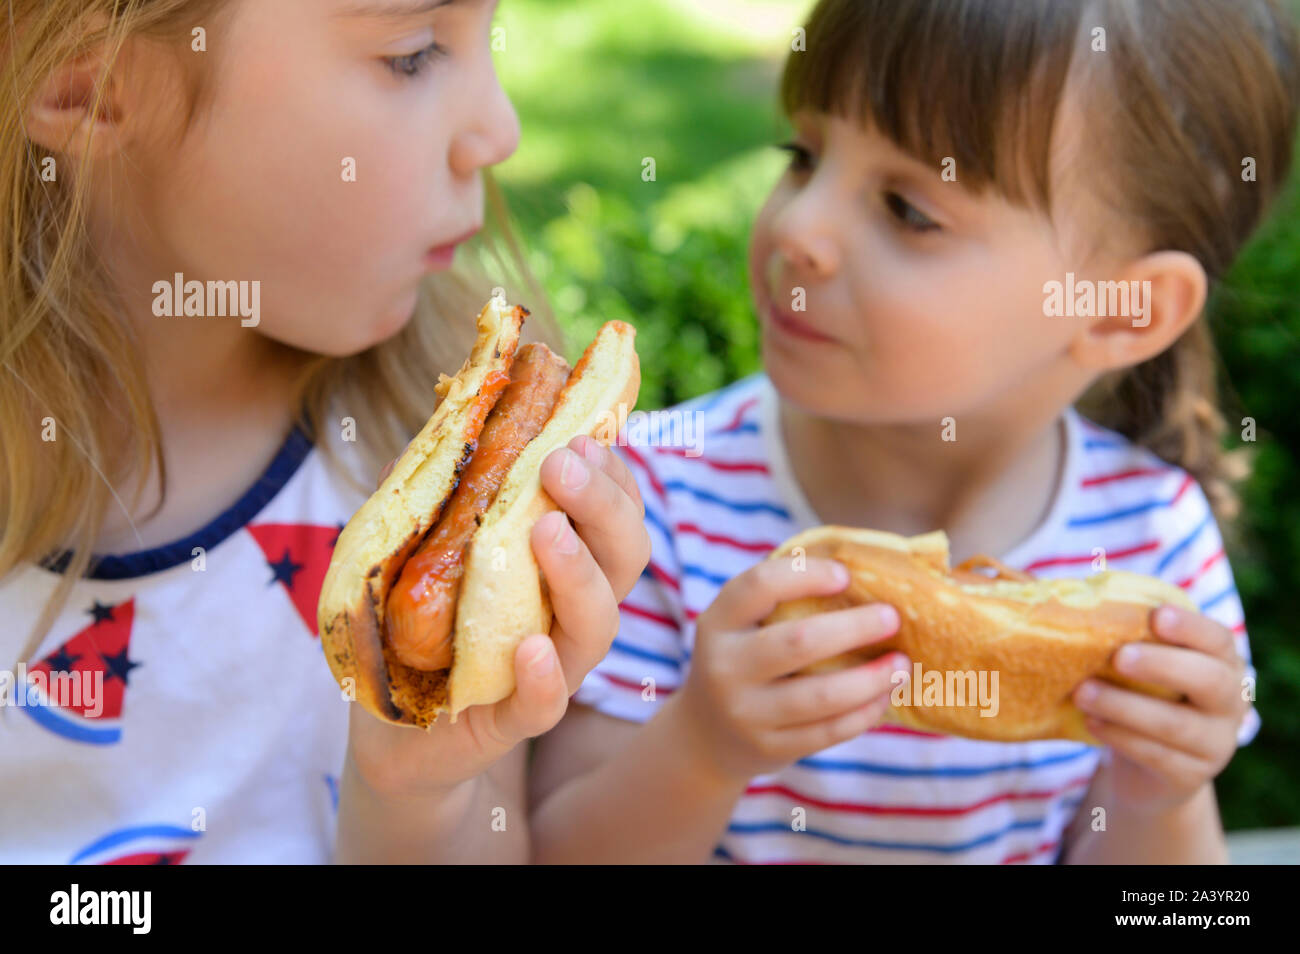 Girls eating hot dogs Stock Photo